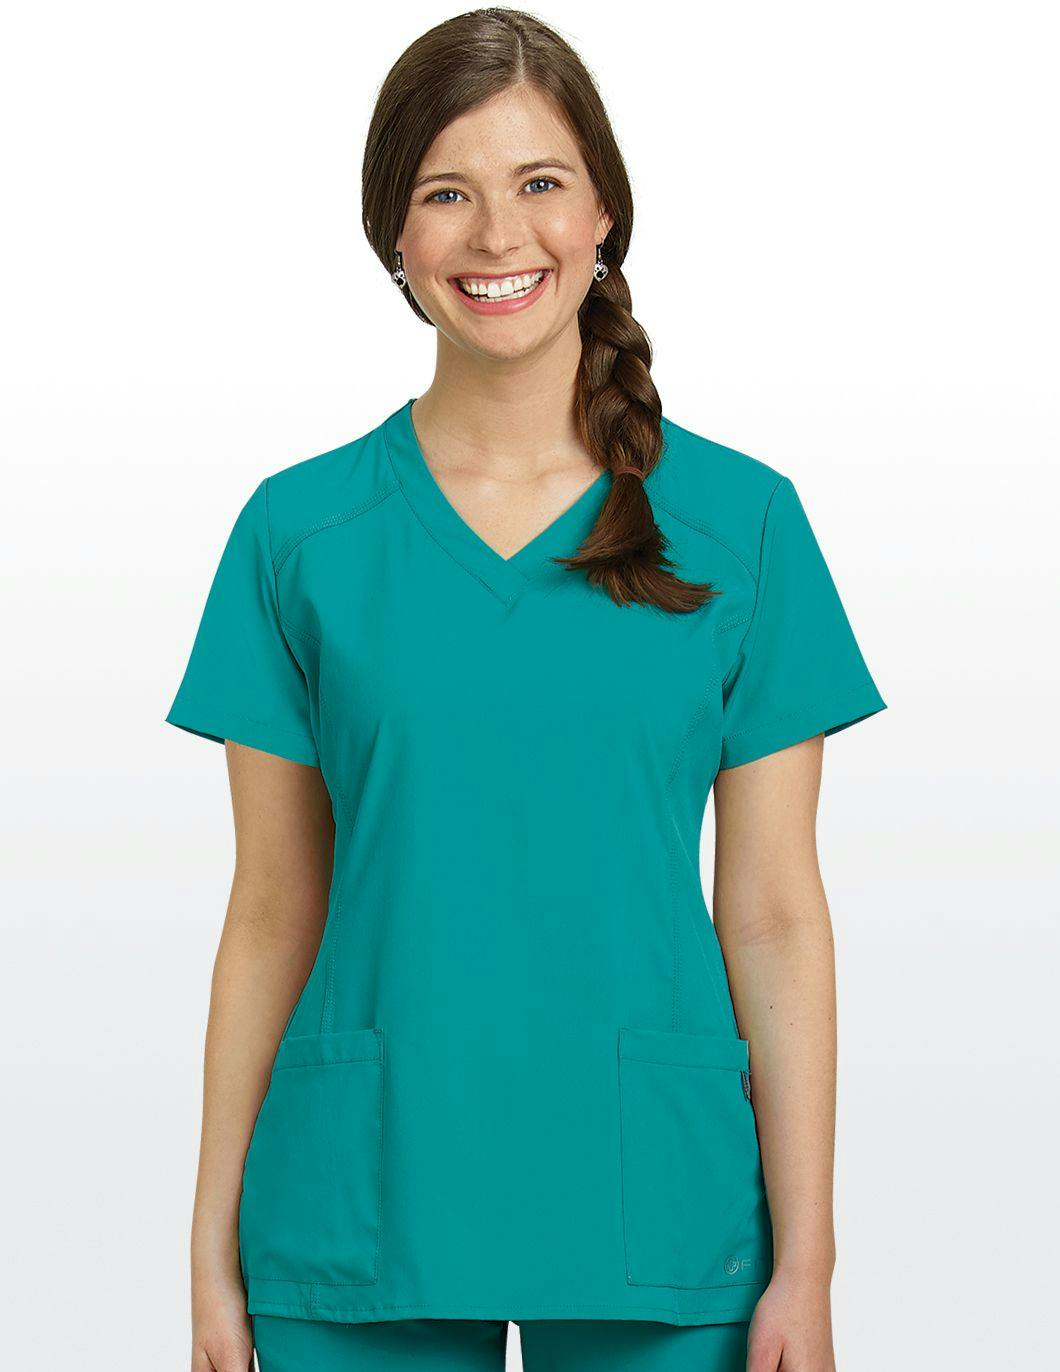 whitecross-fit-womens-two-pocket-scrub-top-teal